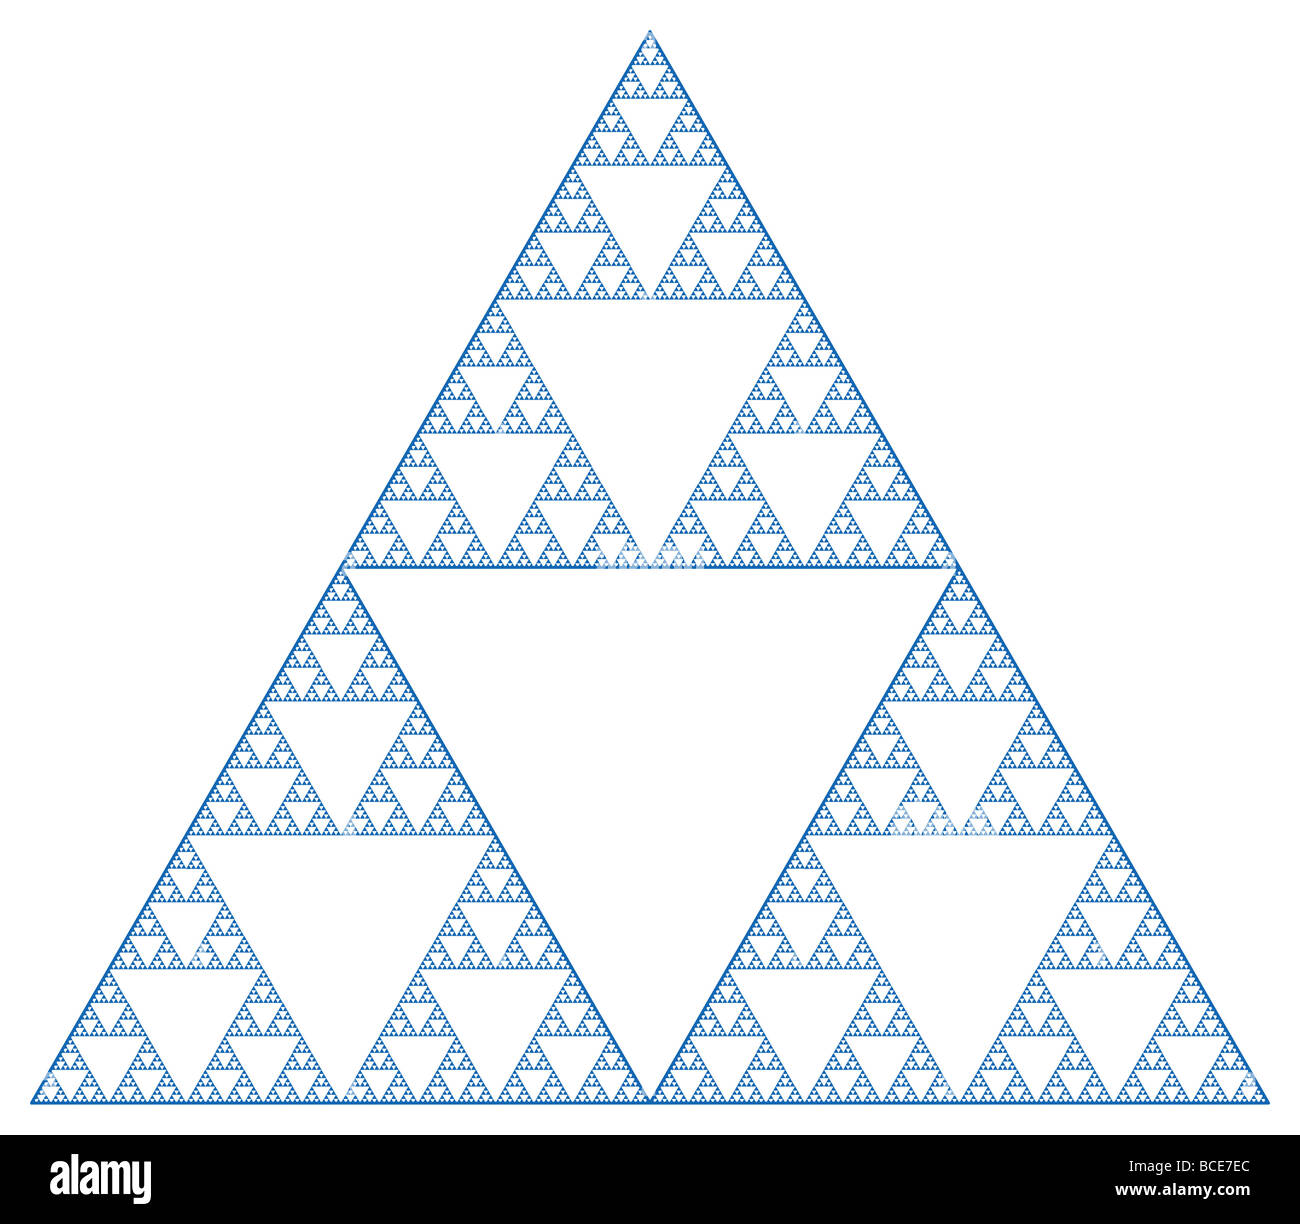 A Sierpinski gasket is made by dividing an equilateral triangle into four, removing the middle one, and repeating the pattern. Stock Photo